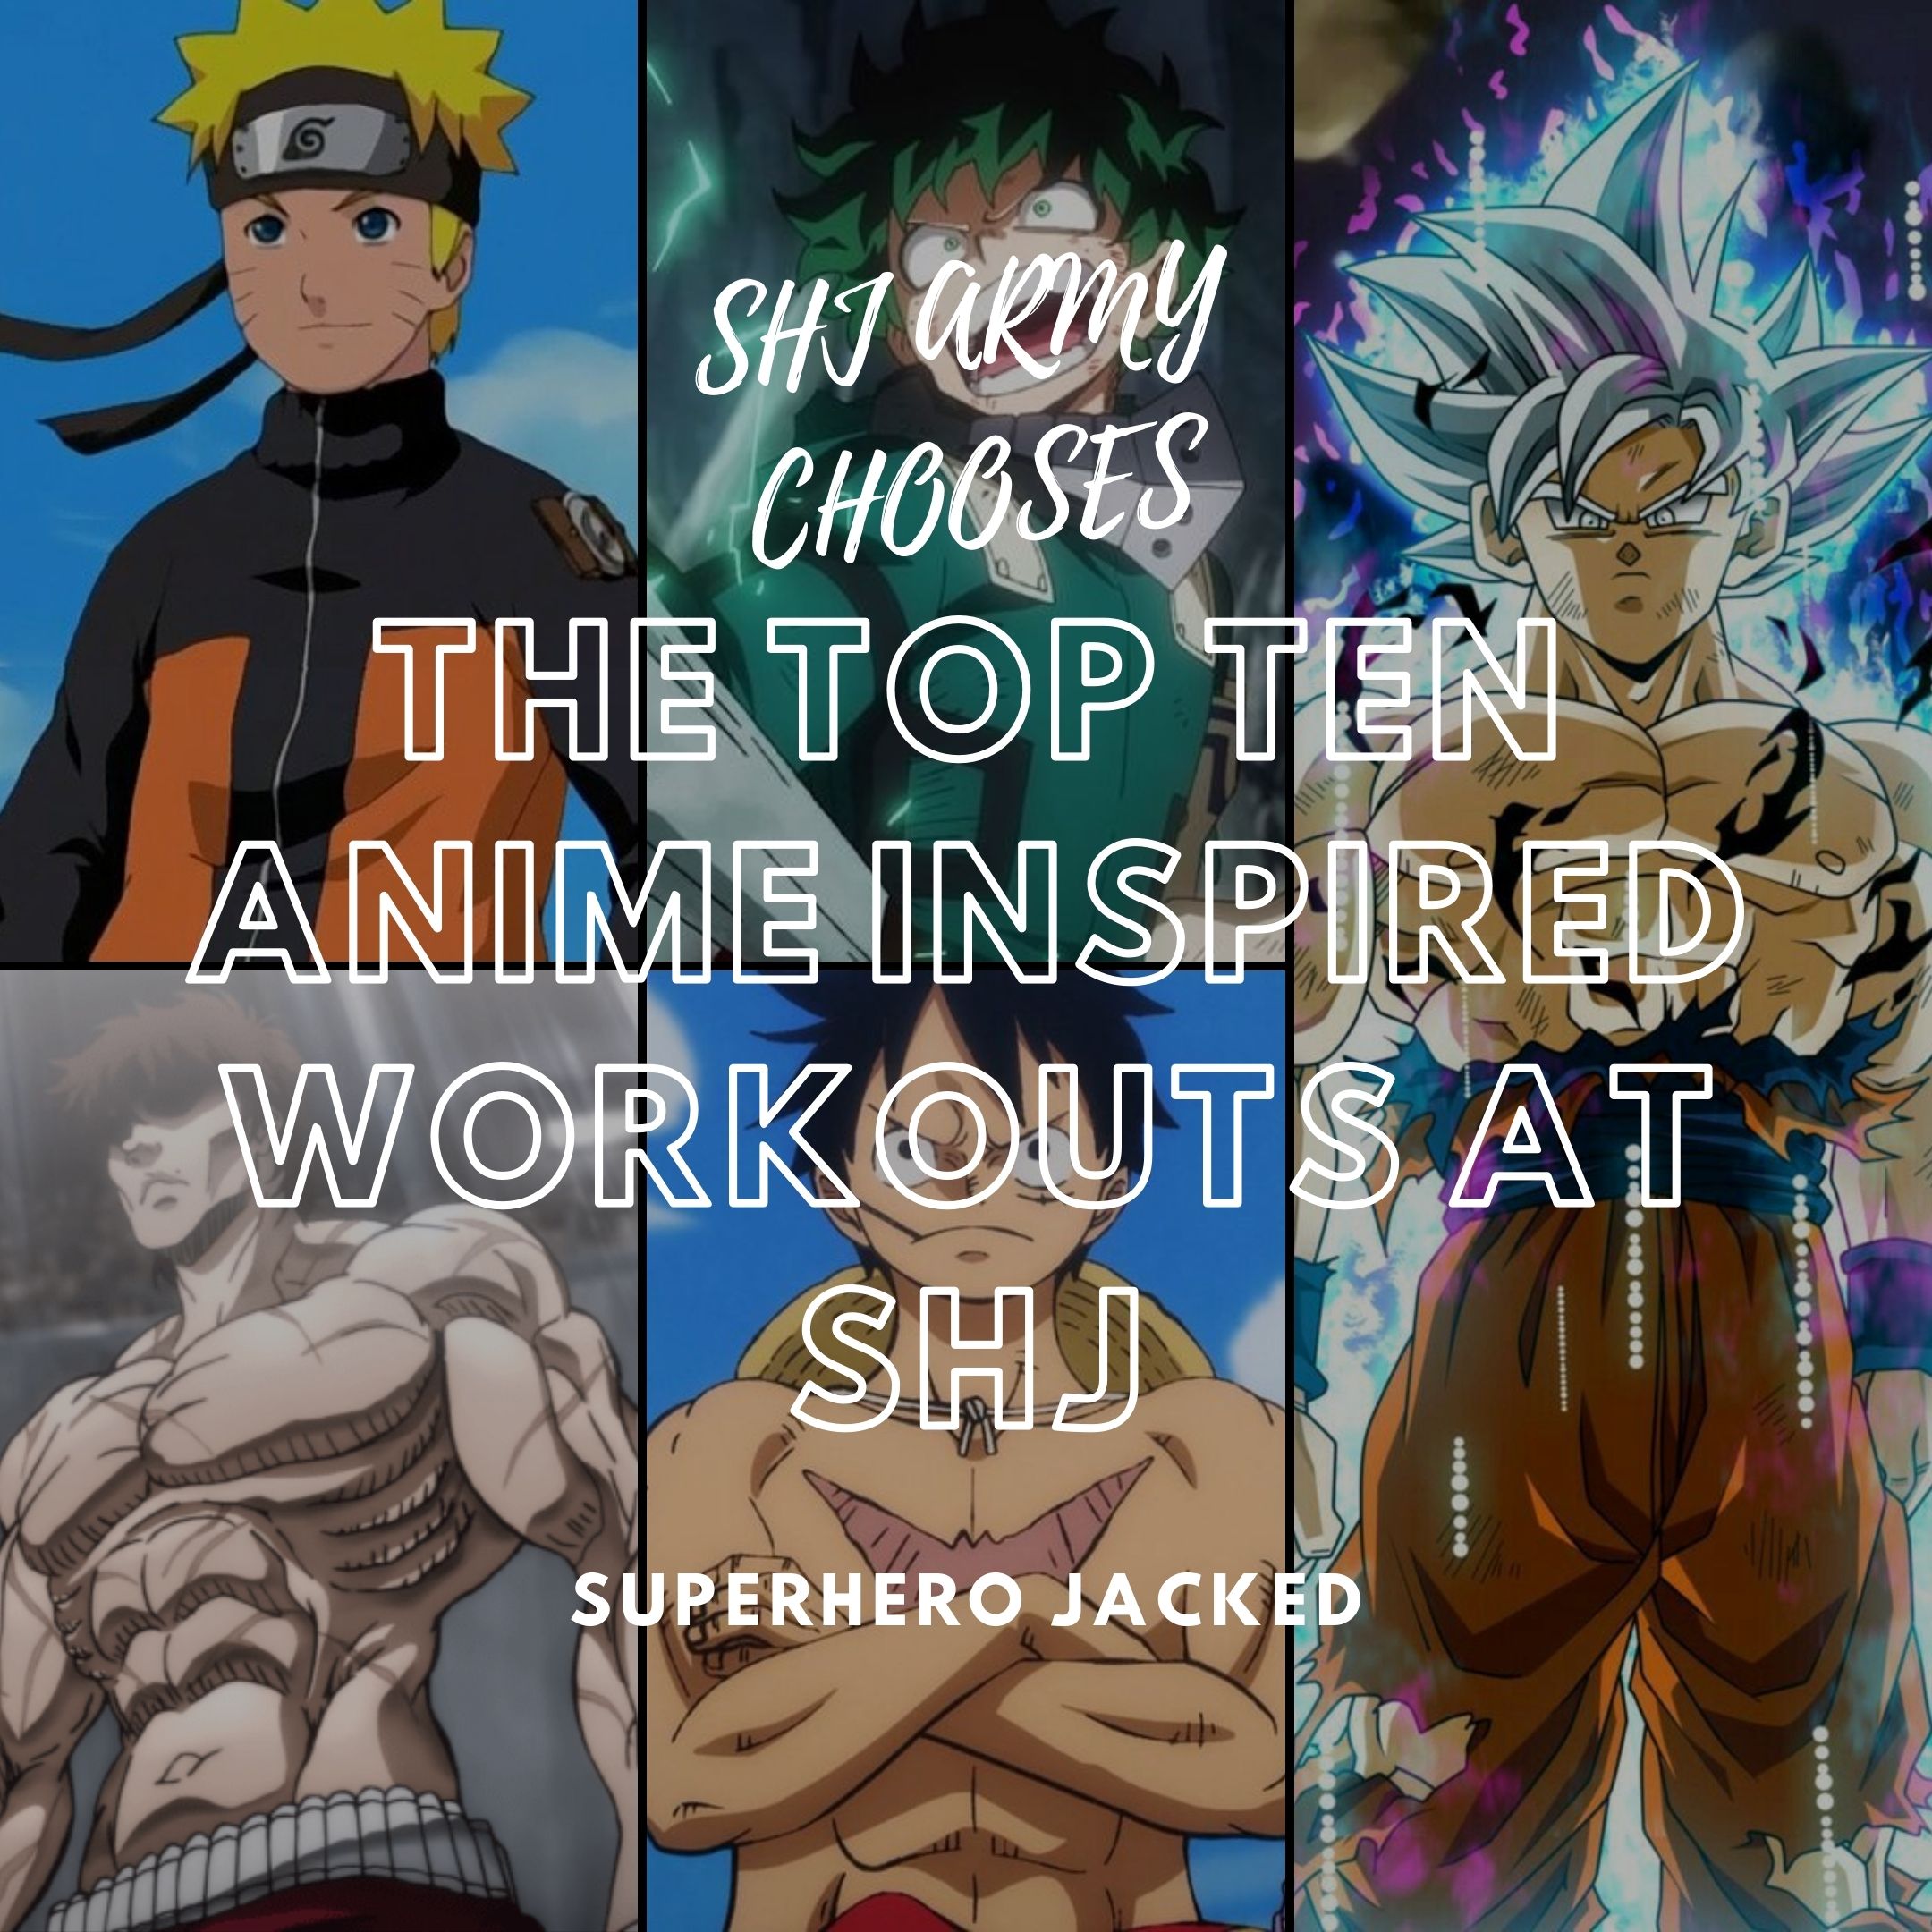 User Choice: The Top 10 Anime Workouts at SHJ – Superhero Jacked